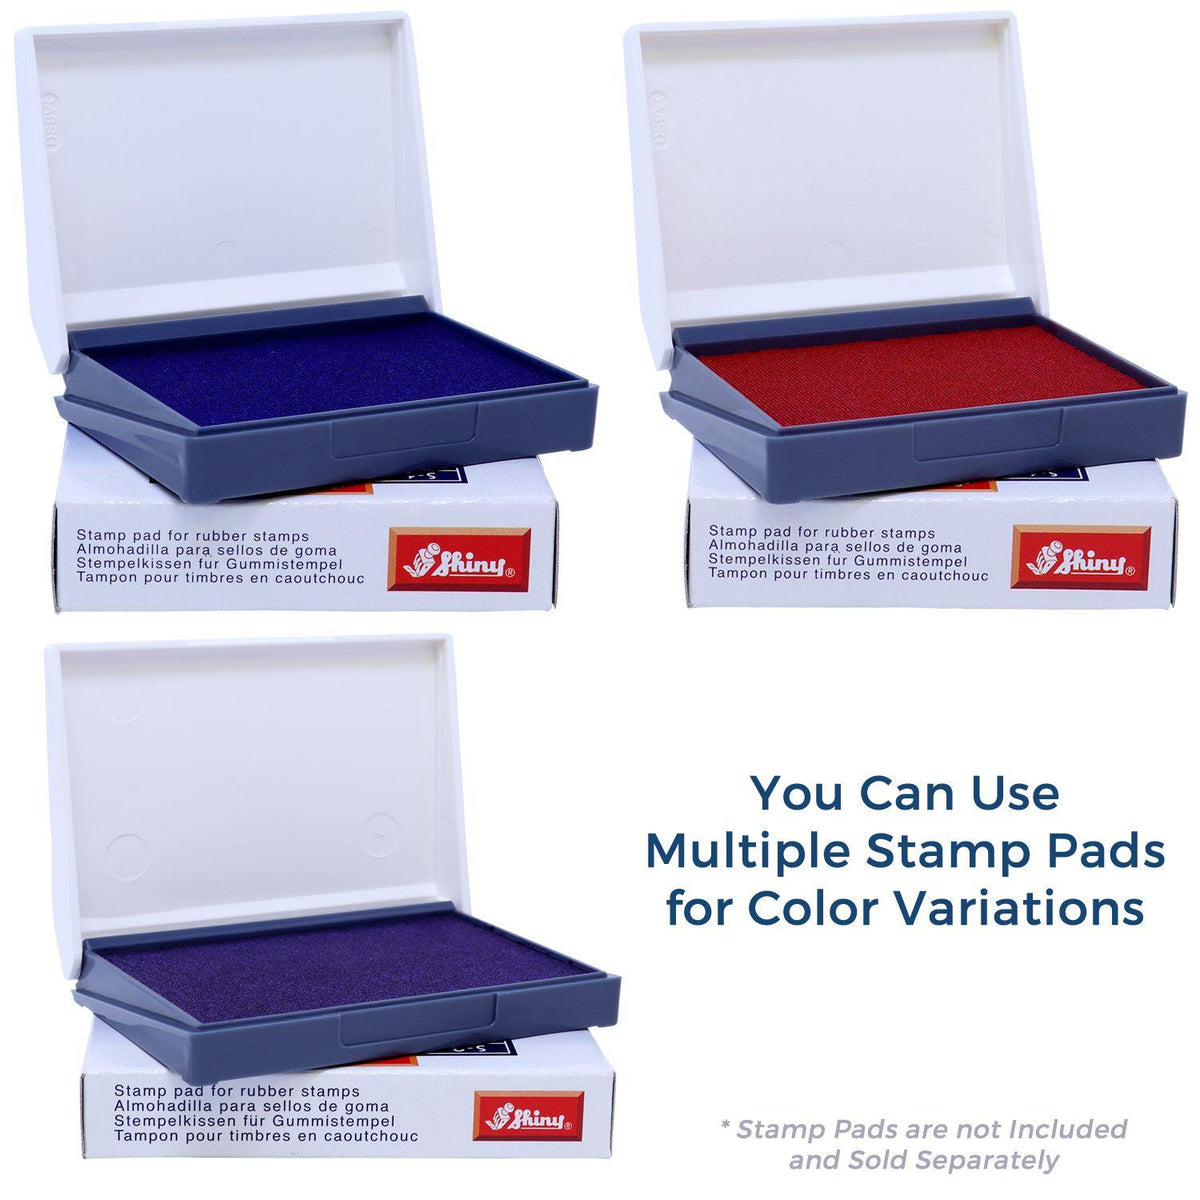 Stamp Pads for Large Cancelled Rubber Stamp Available